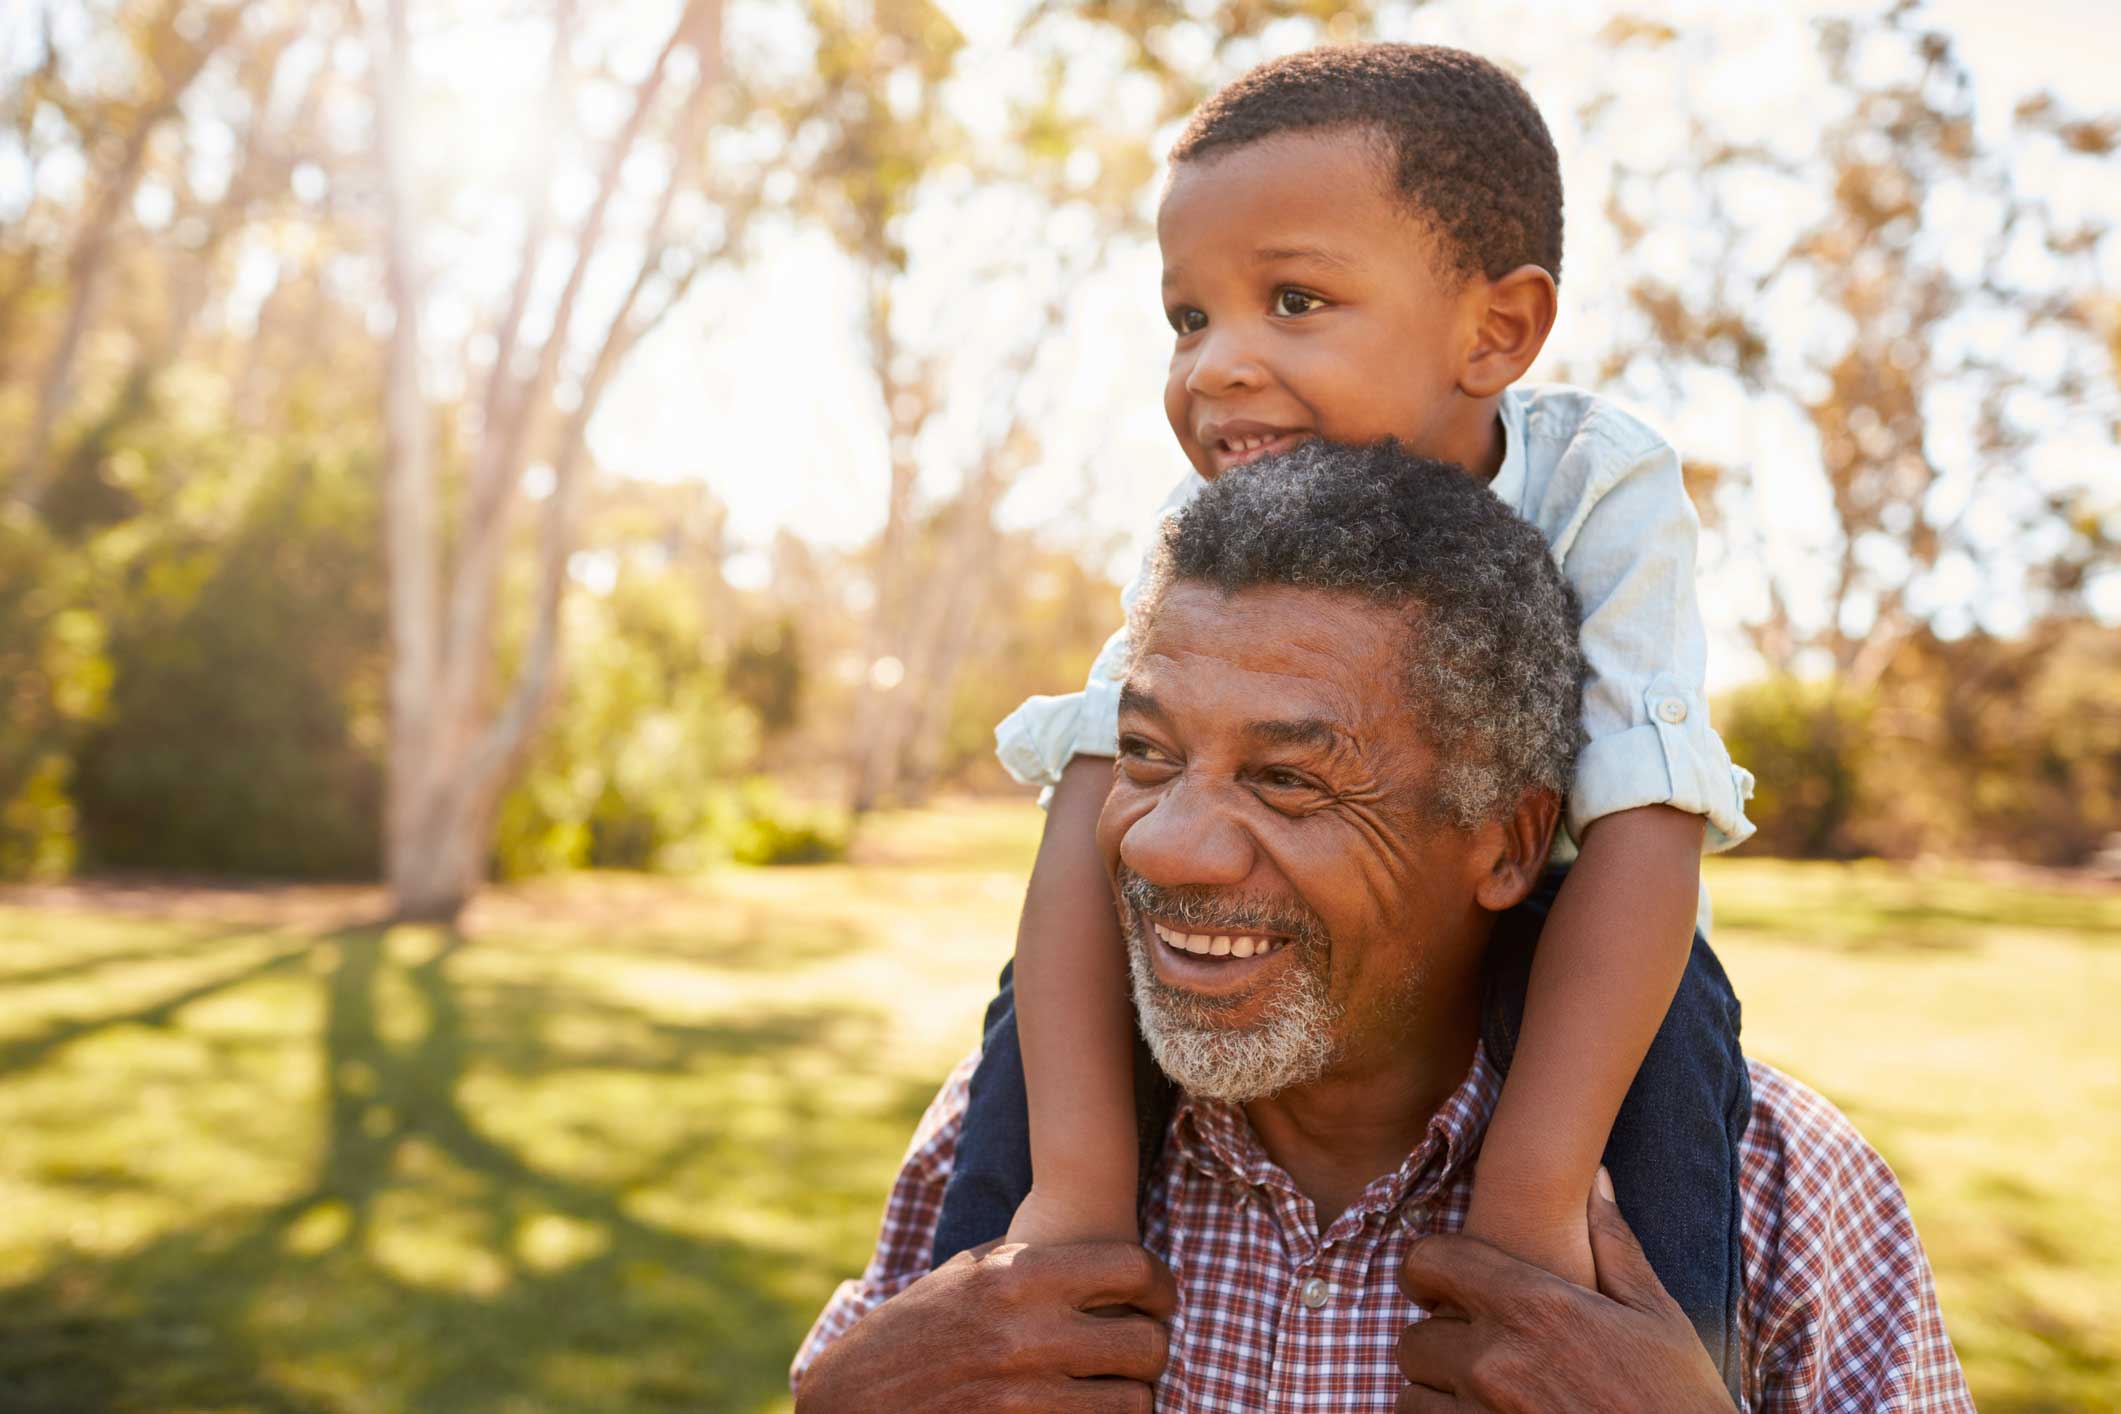 Why Race Makes a Difference in Men With Prostate Cancer